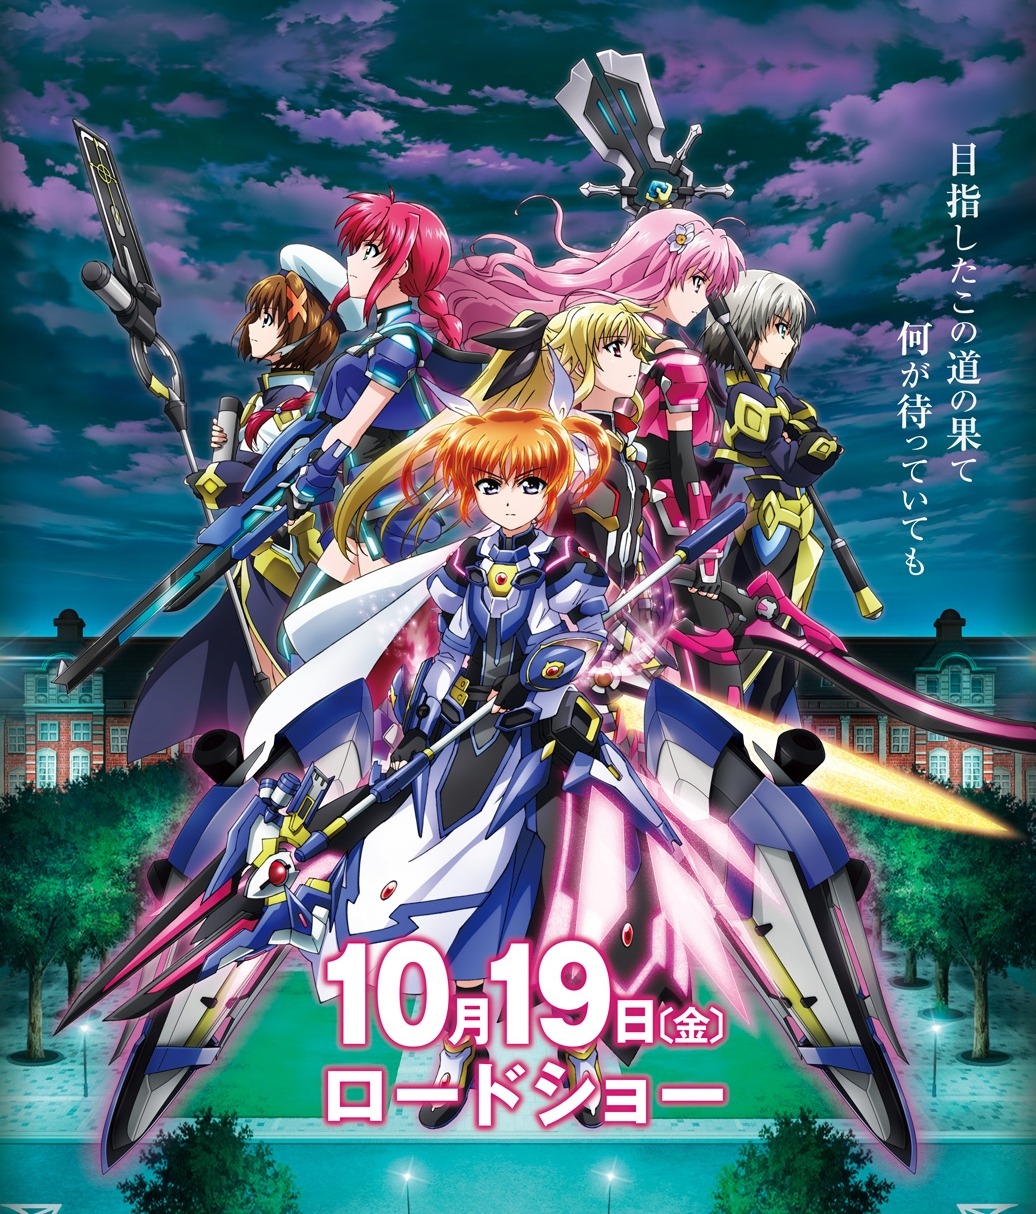 A new poster visual for the âMahou Shoujo Lyrical Nanoha: Detonationâ anime film is now being displayed on its website. Additional cast have also been revealed. It will open in Japanese theaters October 19th. â¢ Koichi Yamadera â¢ Eiji Miyashita â¢...